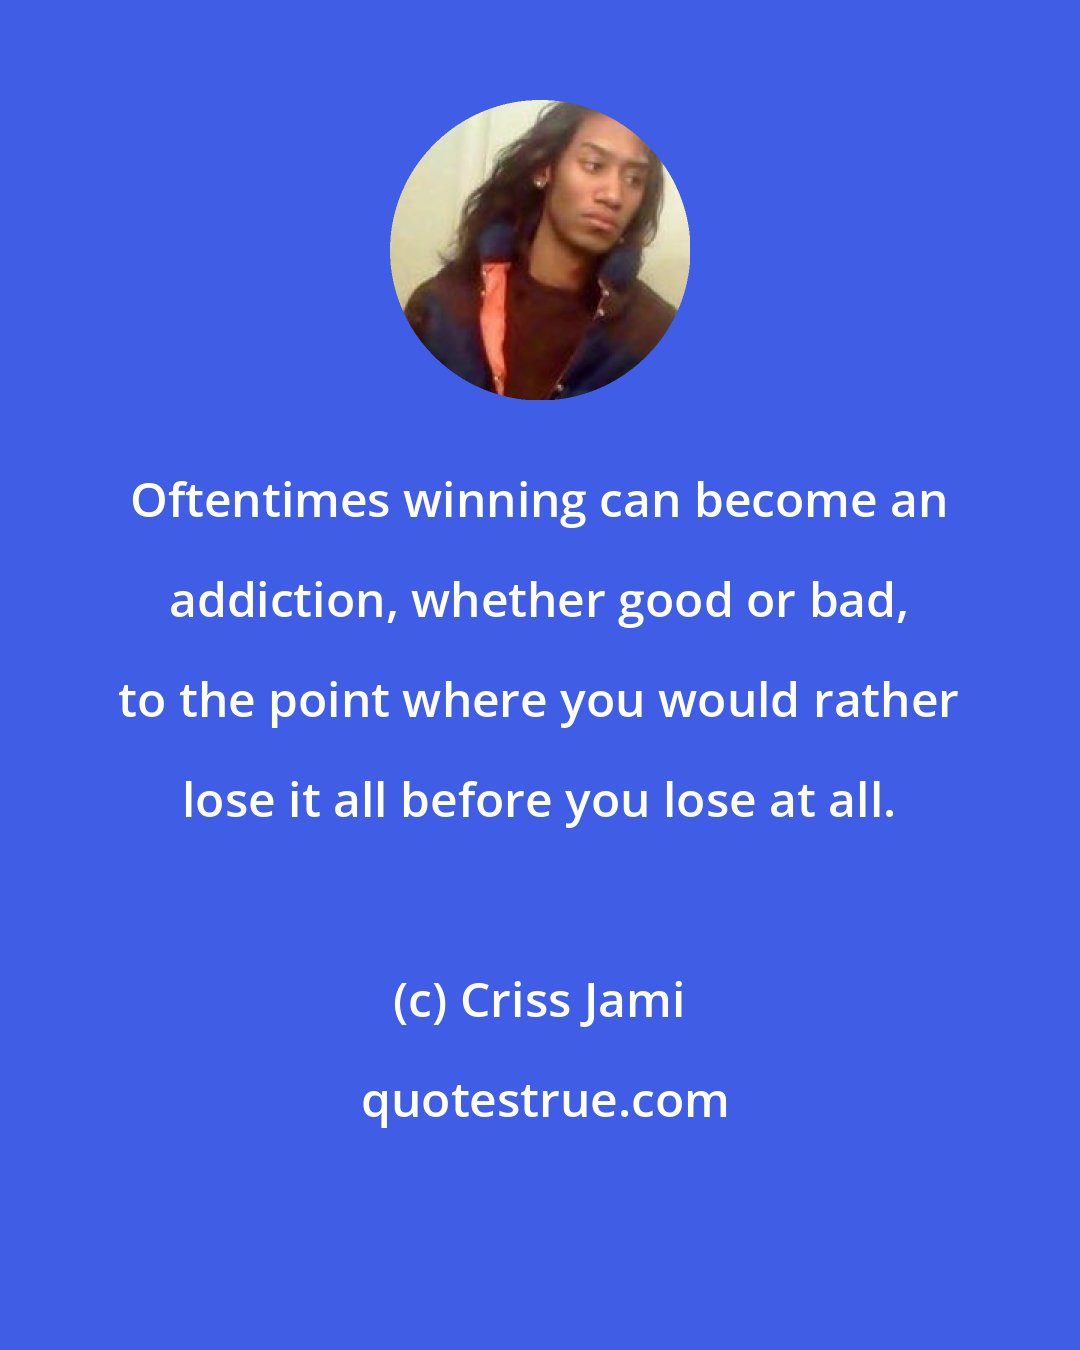 Criss Jami: Oftentimes winning can become an addiction, whether good or bad, to the point where you would rather lose it all before you lose at all.